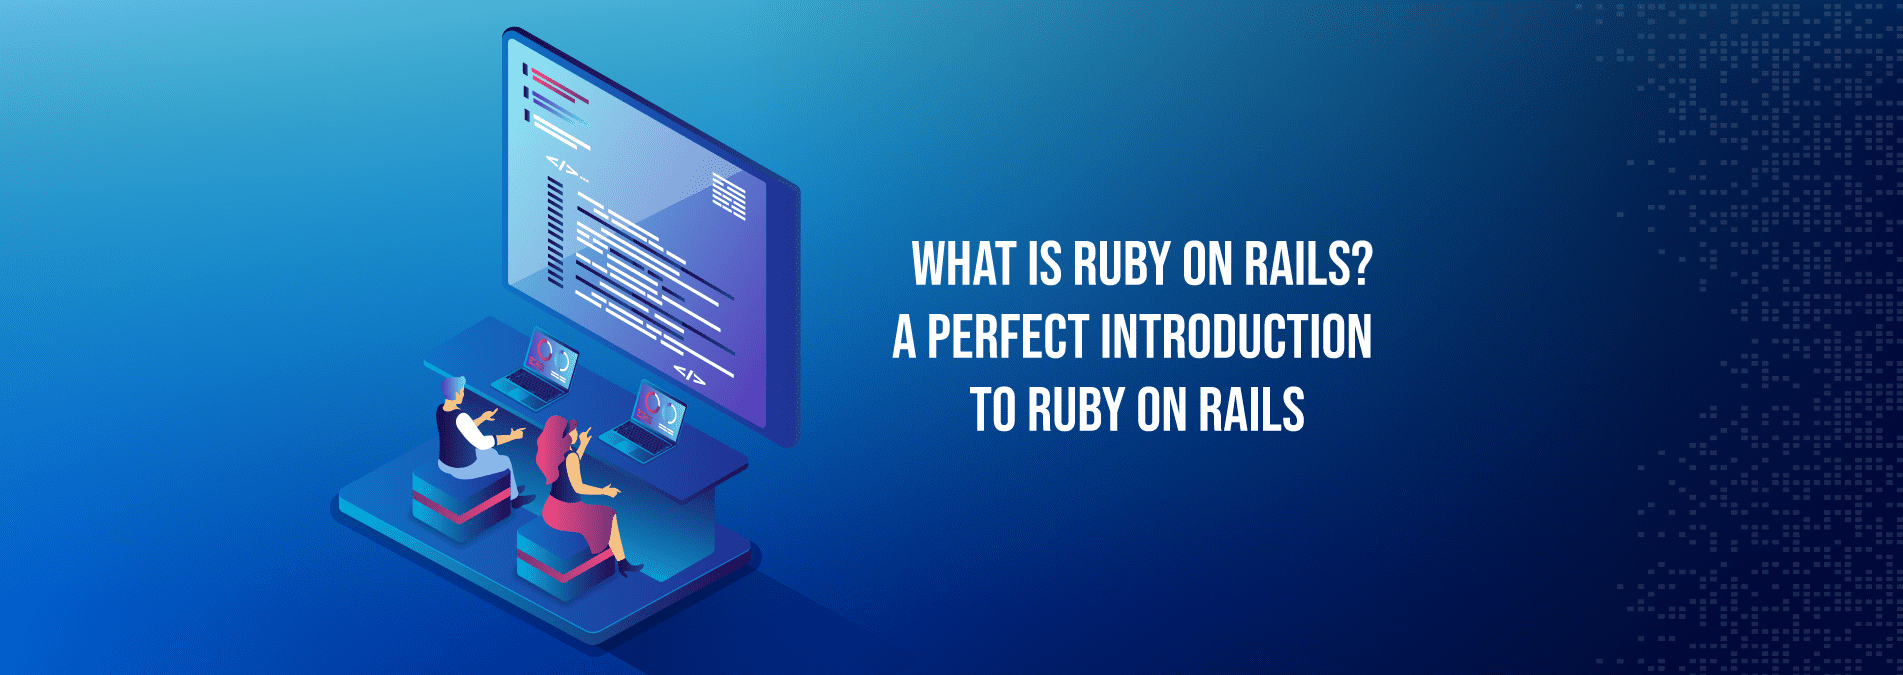 What is Ruby on Rails? A Perfect Introduction to Ruby on Rails - Internet Soft